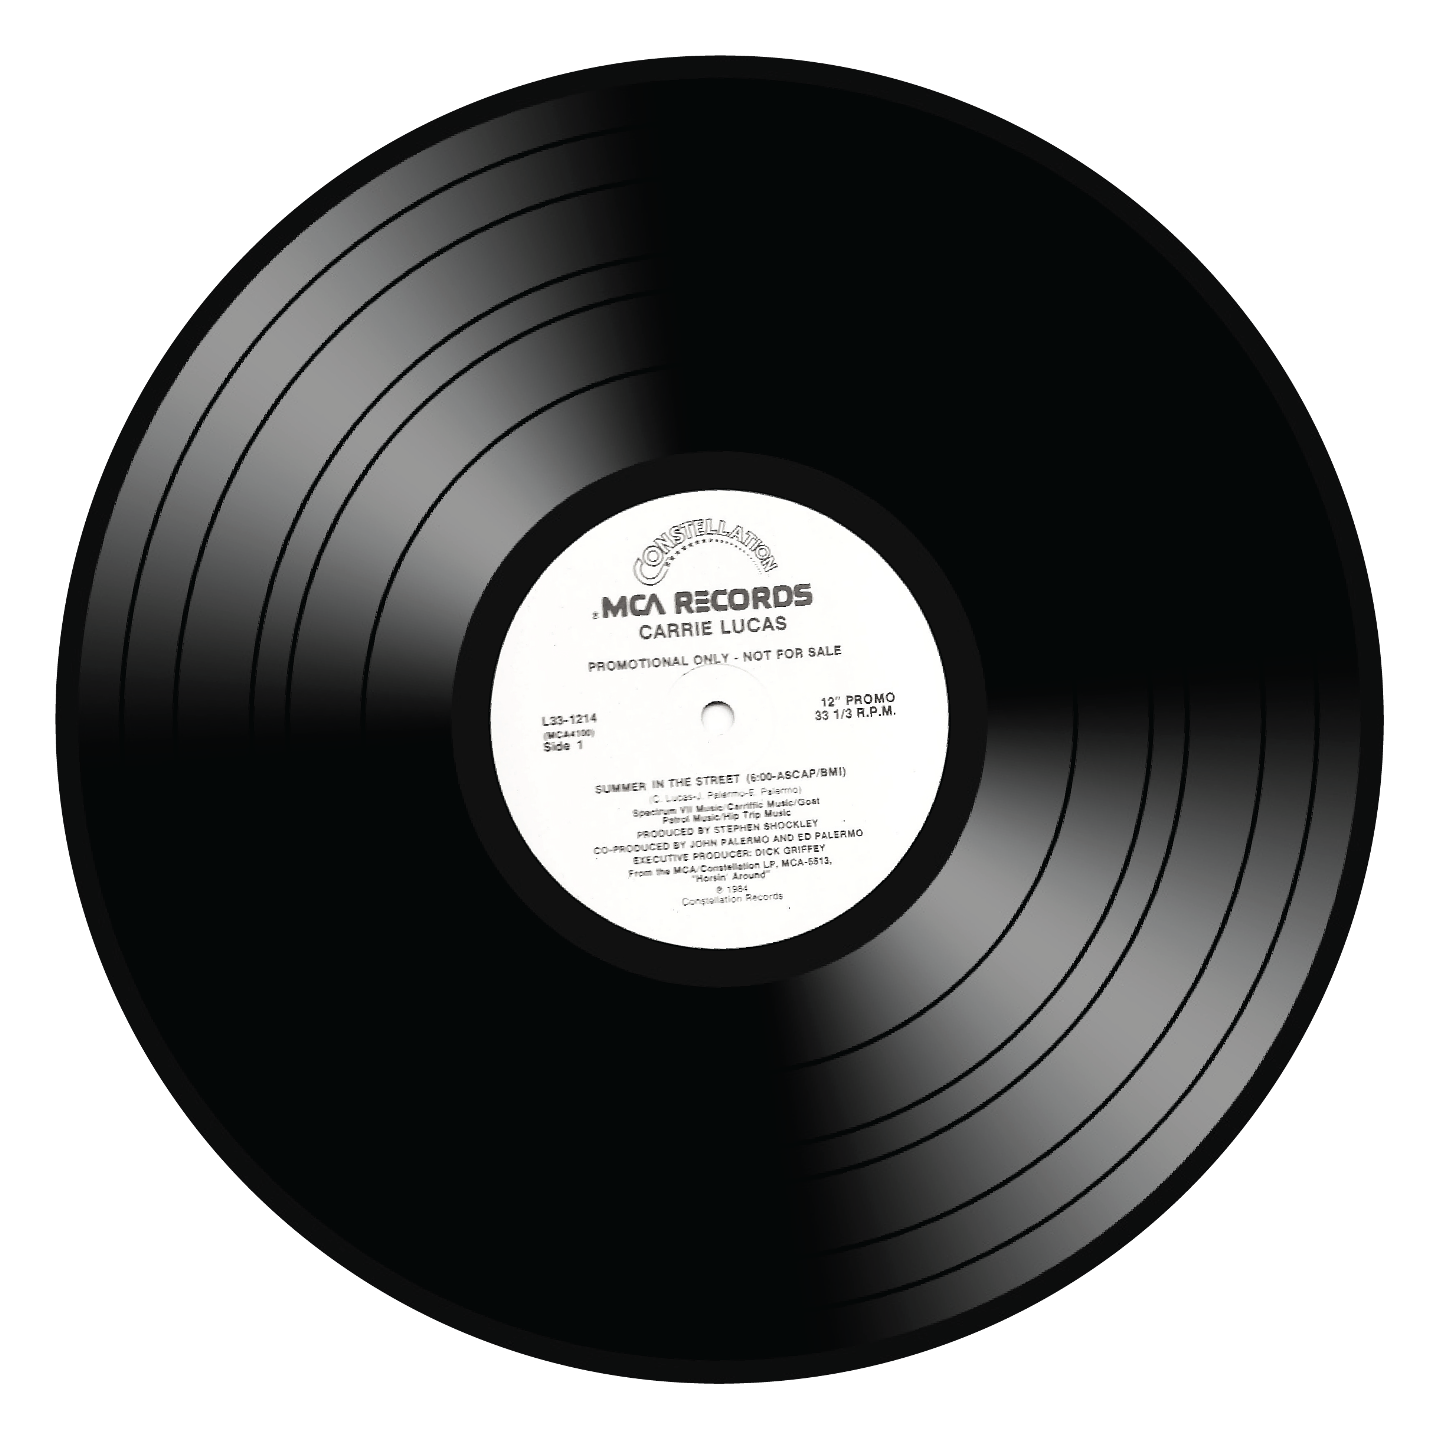 Vinyl record PNG images free download